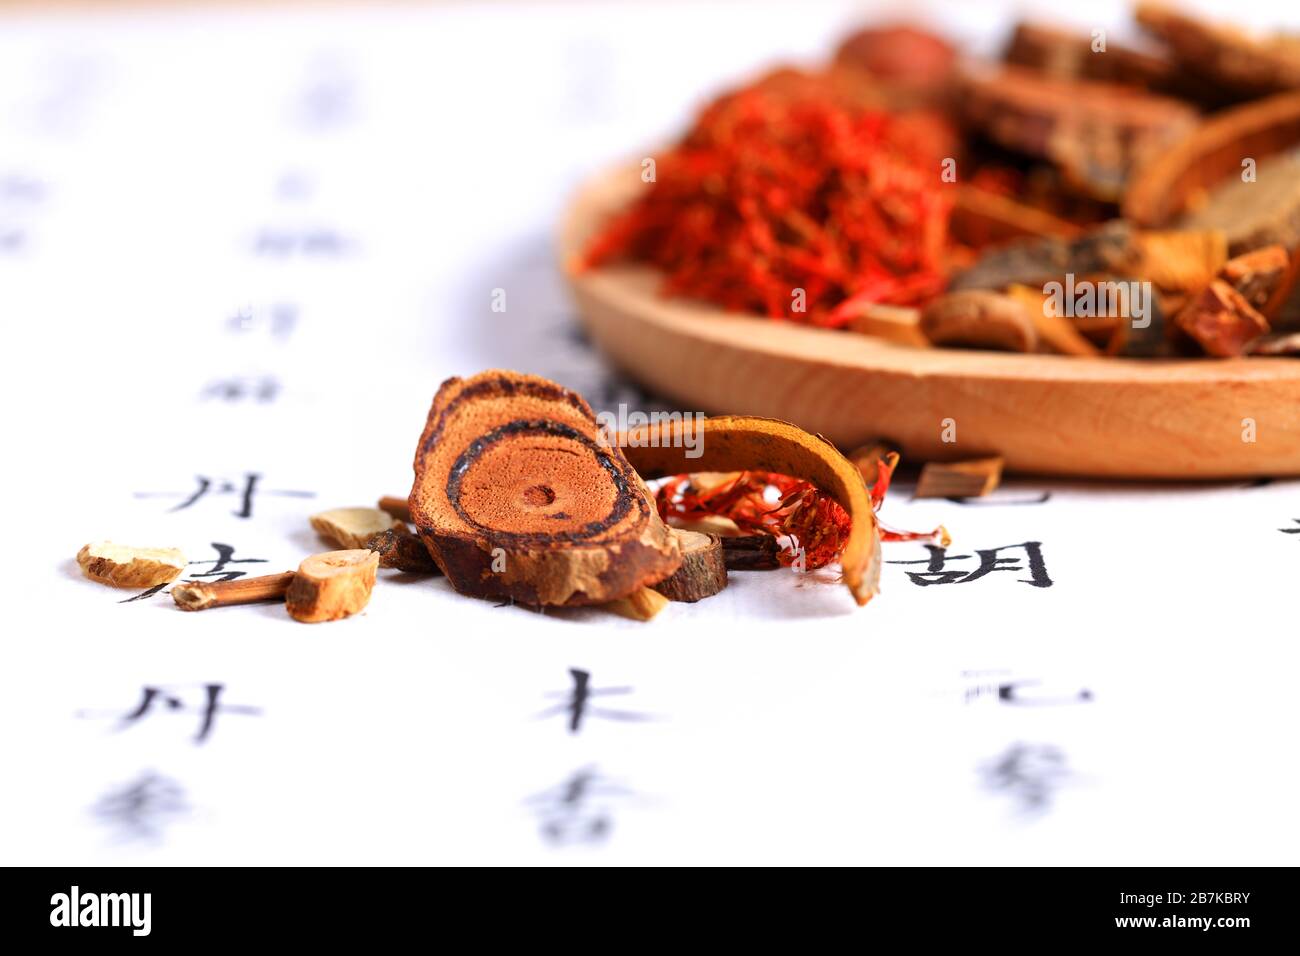 Chinese herbal medicine, Medical concept Stock Photo